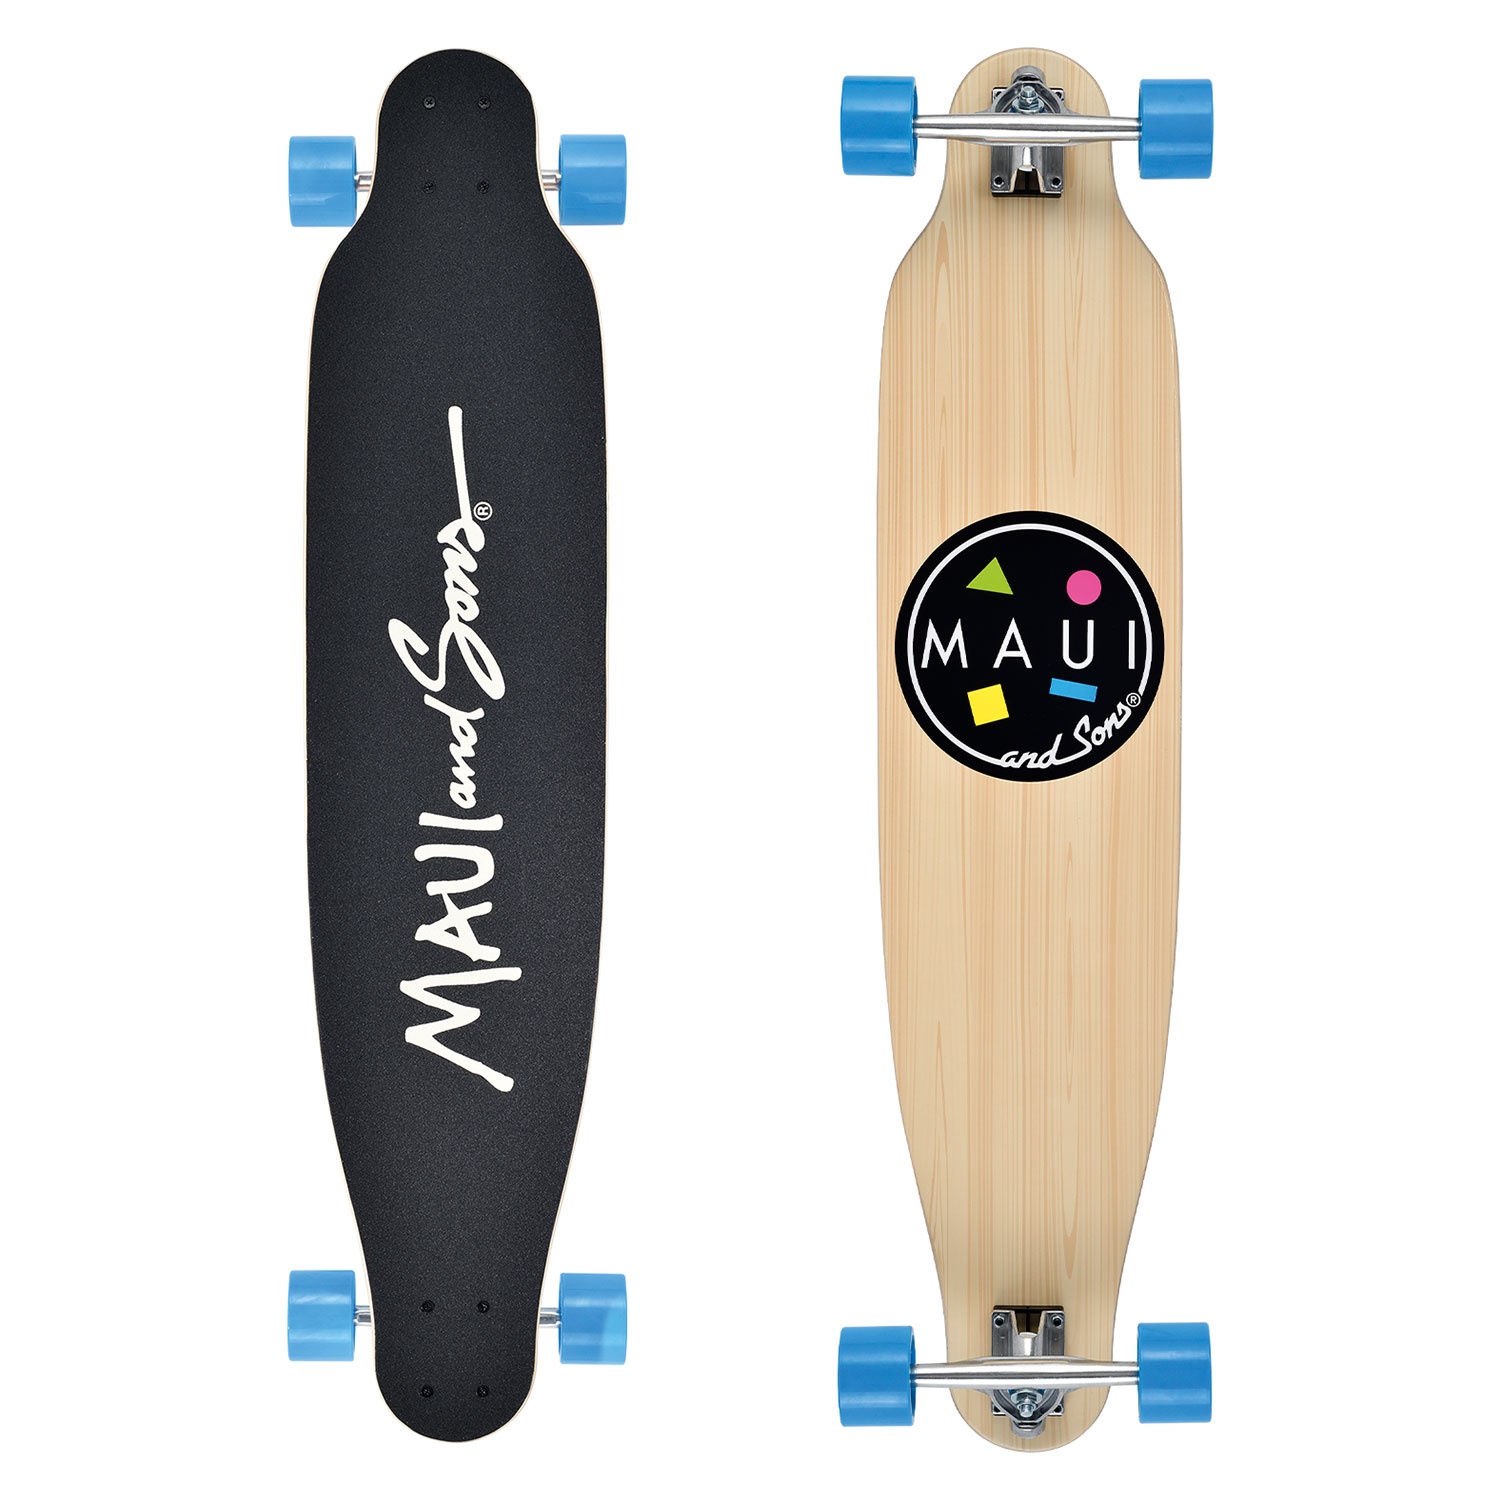 MAUI AND SONS Skate- oder Longboard